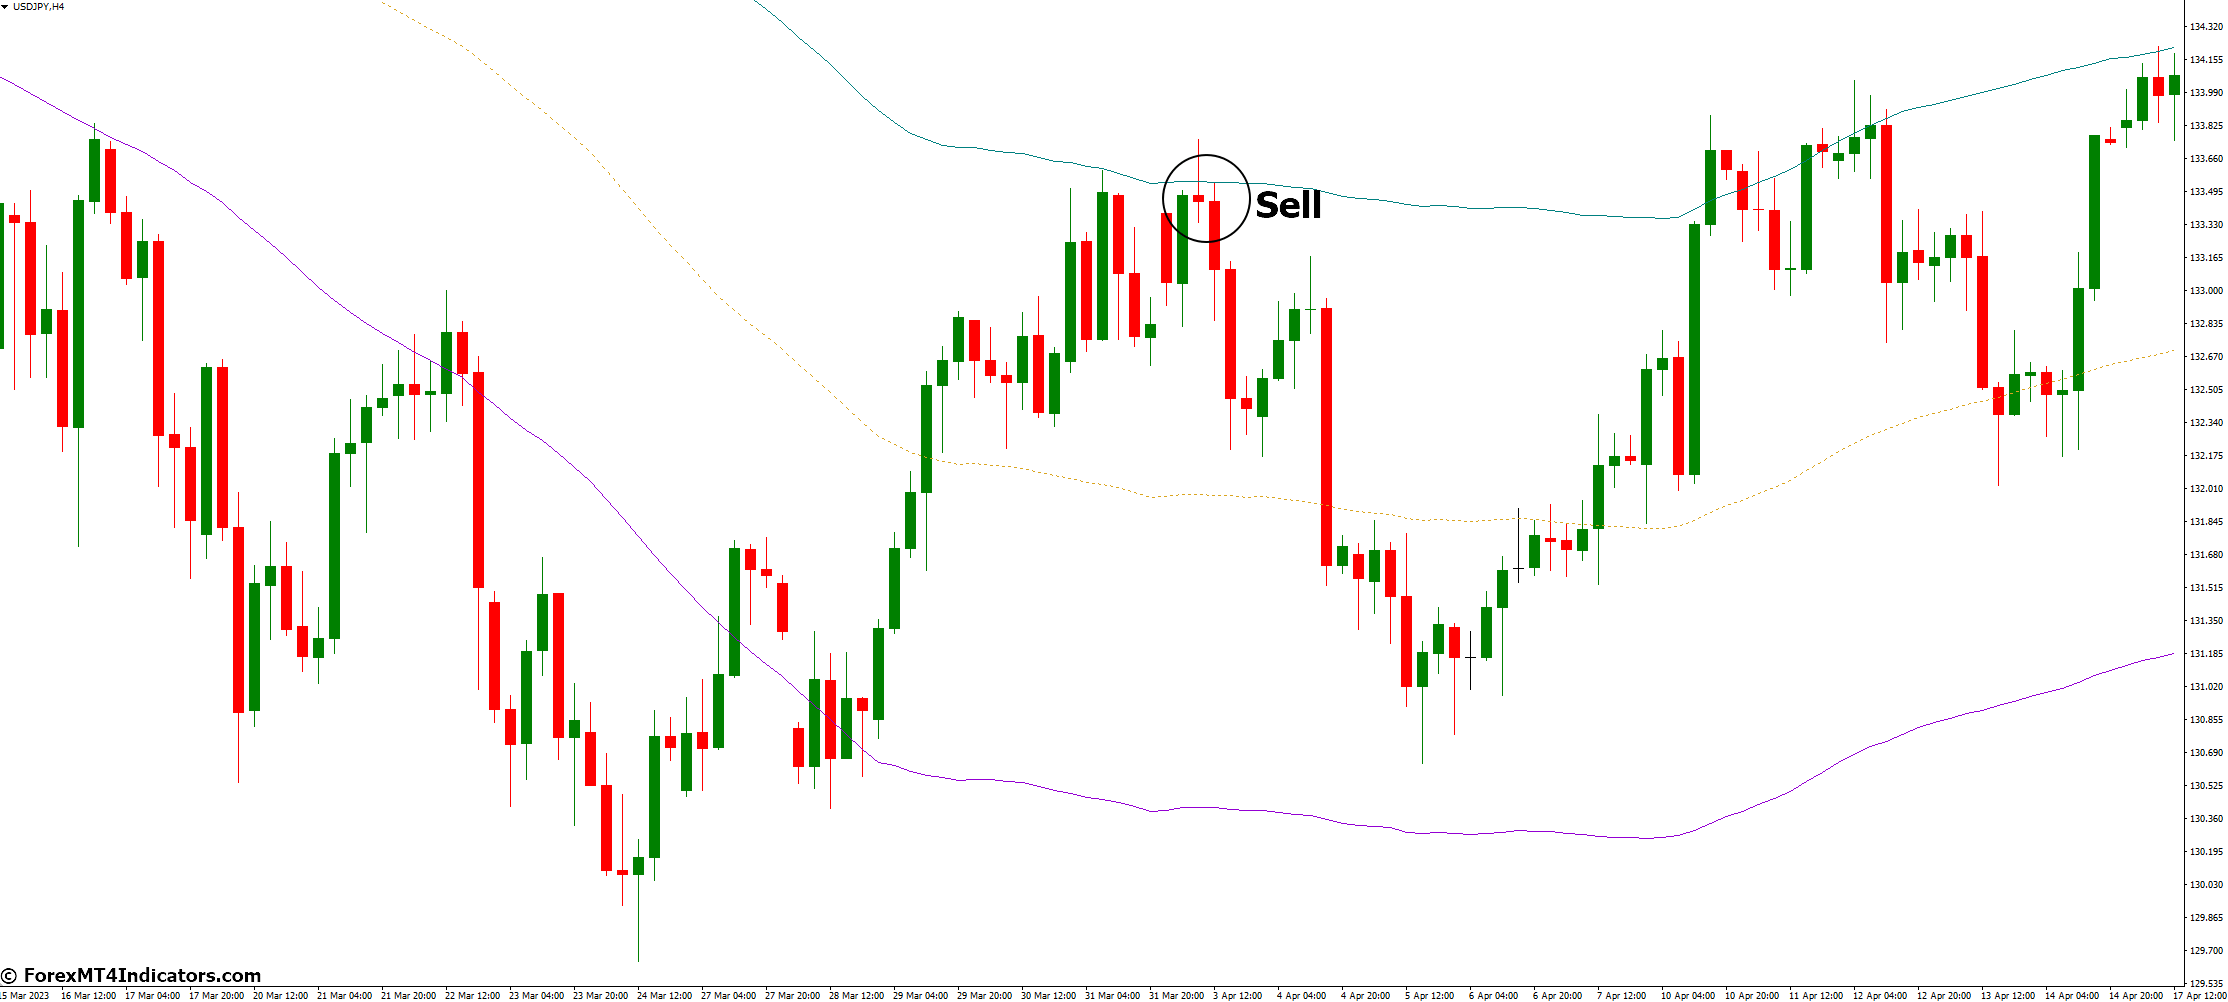 How to Trade with ATR Bands MT4 Indicator - Sell Entry